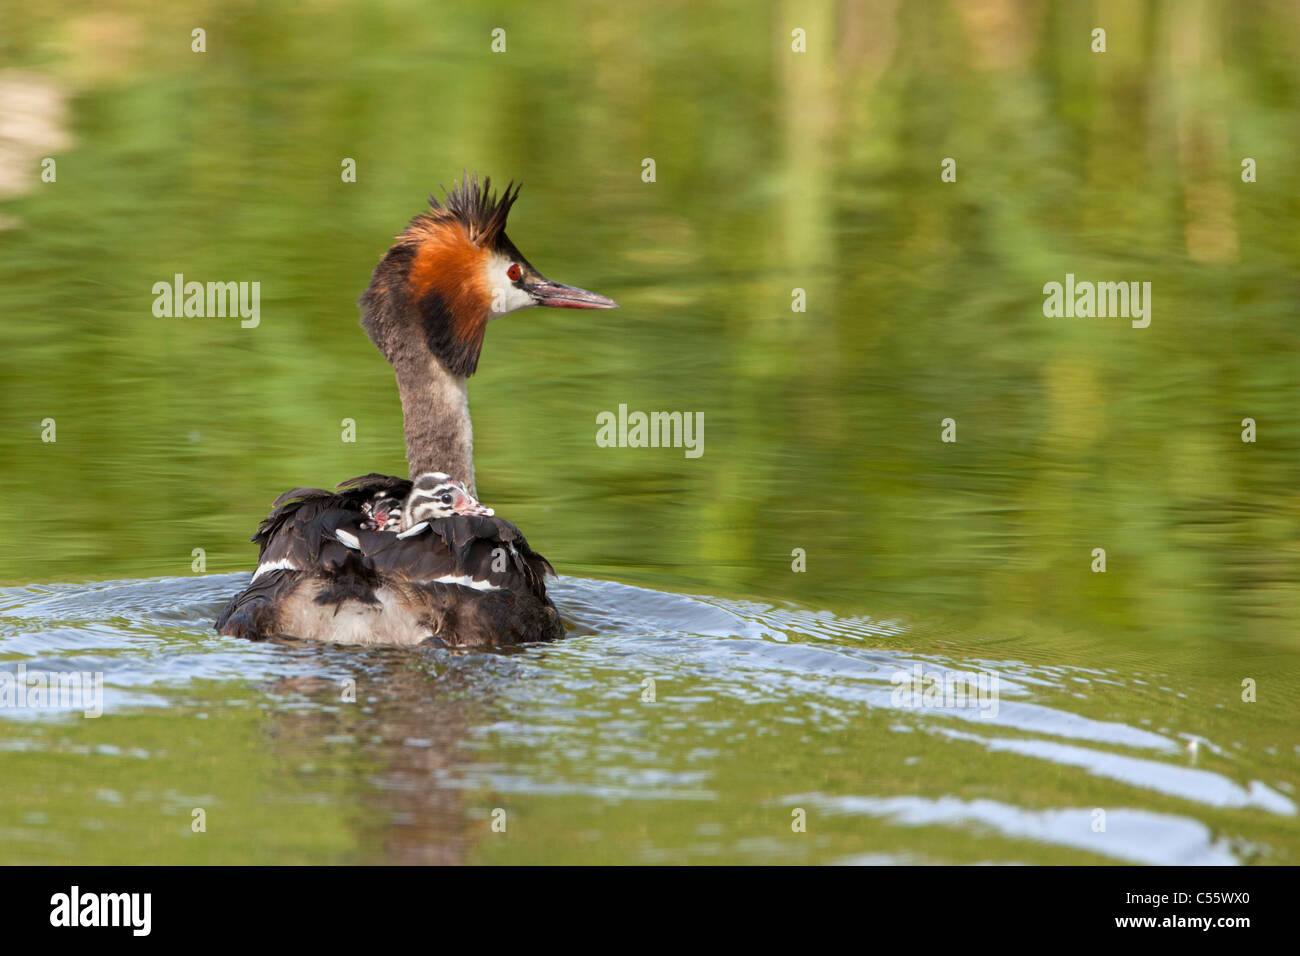 The Netherlands, Werkendam, De Biesbosch national park. Great Crested Grebes, Podiceps cristatus. Young on the back of female. Stock Photo